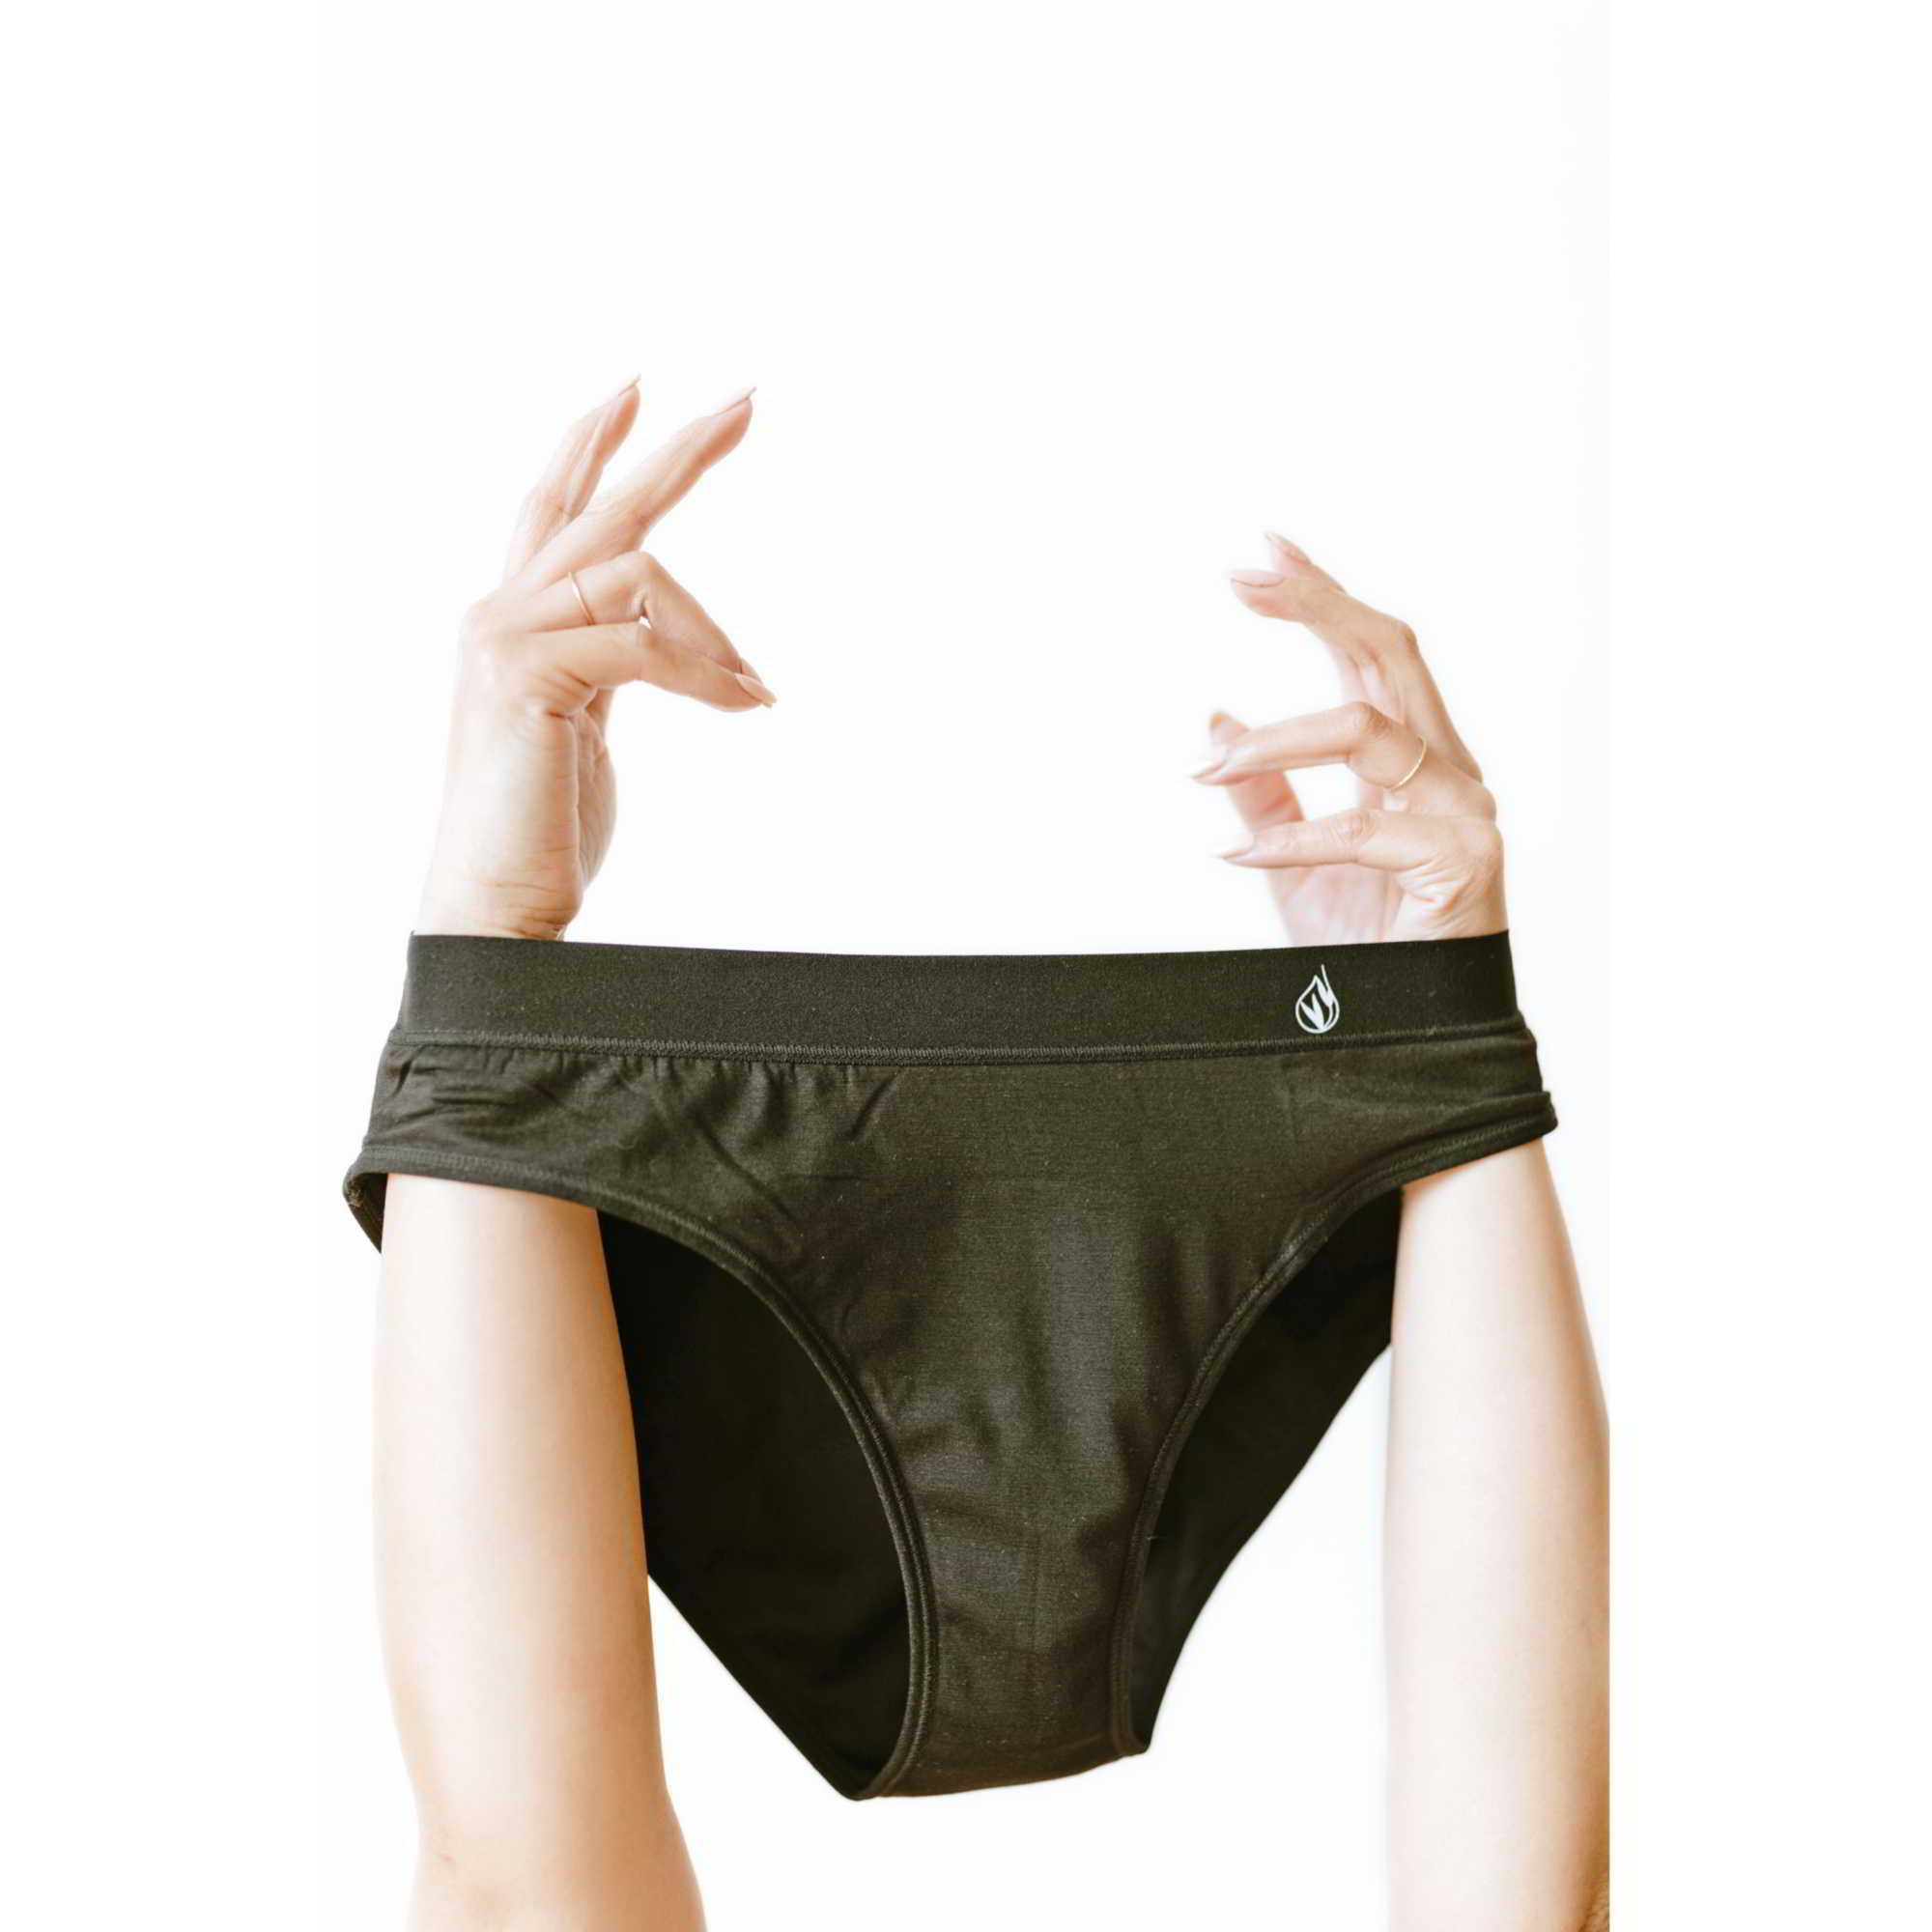 Leakproof period underwear by Caroquilla.  Made of Bamboo and super comfortable.